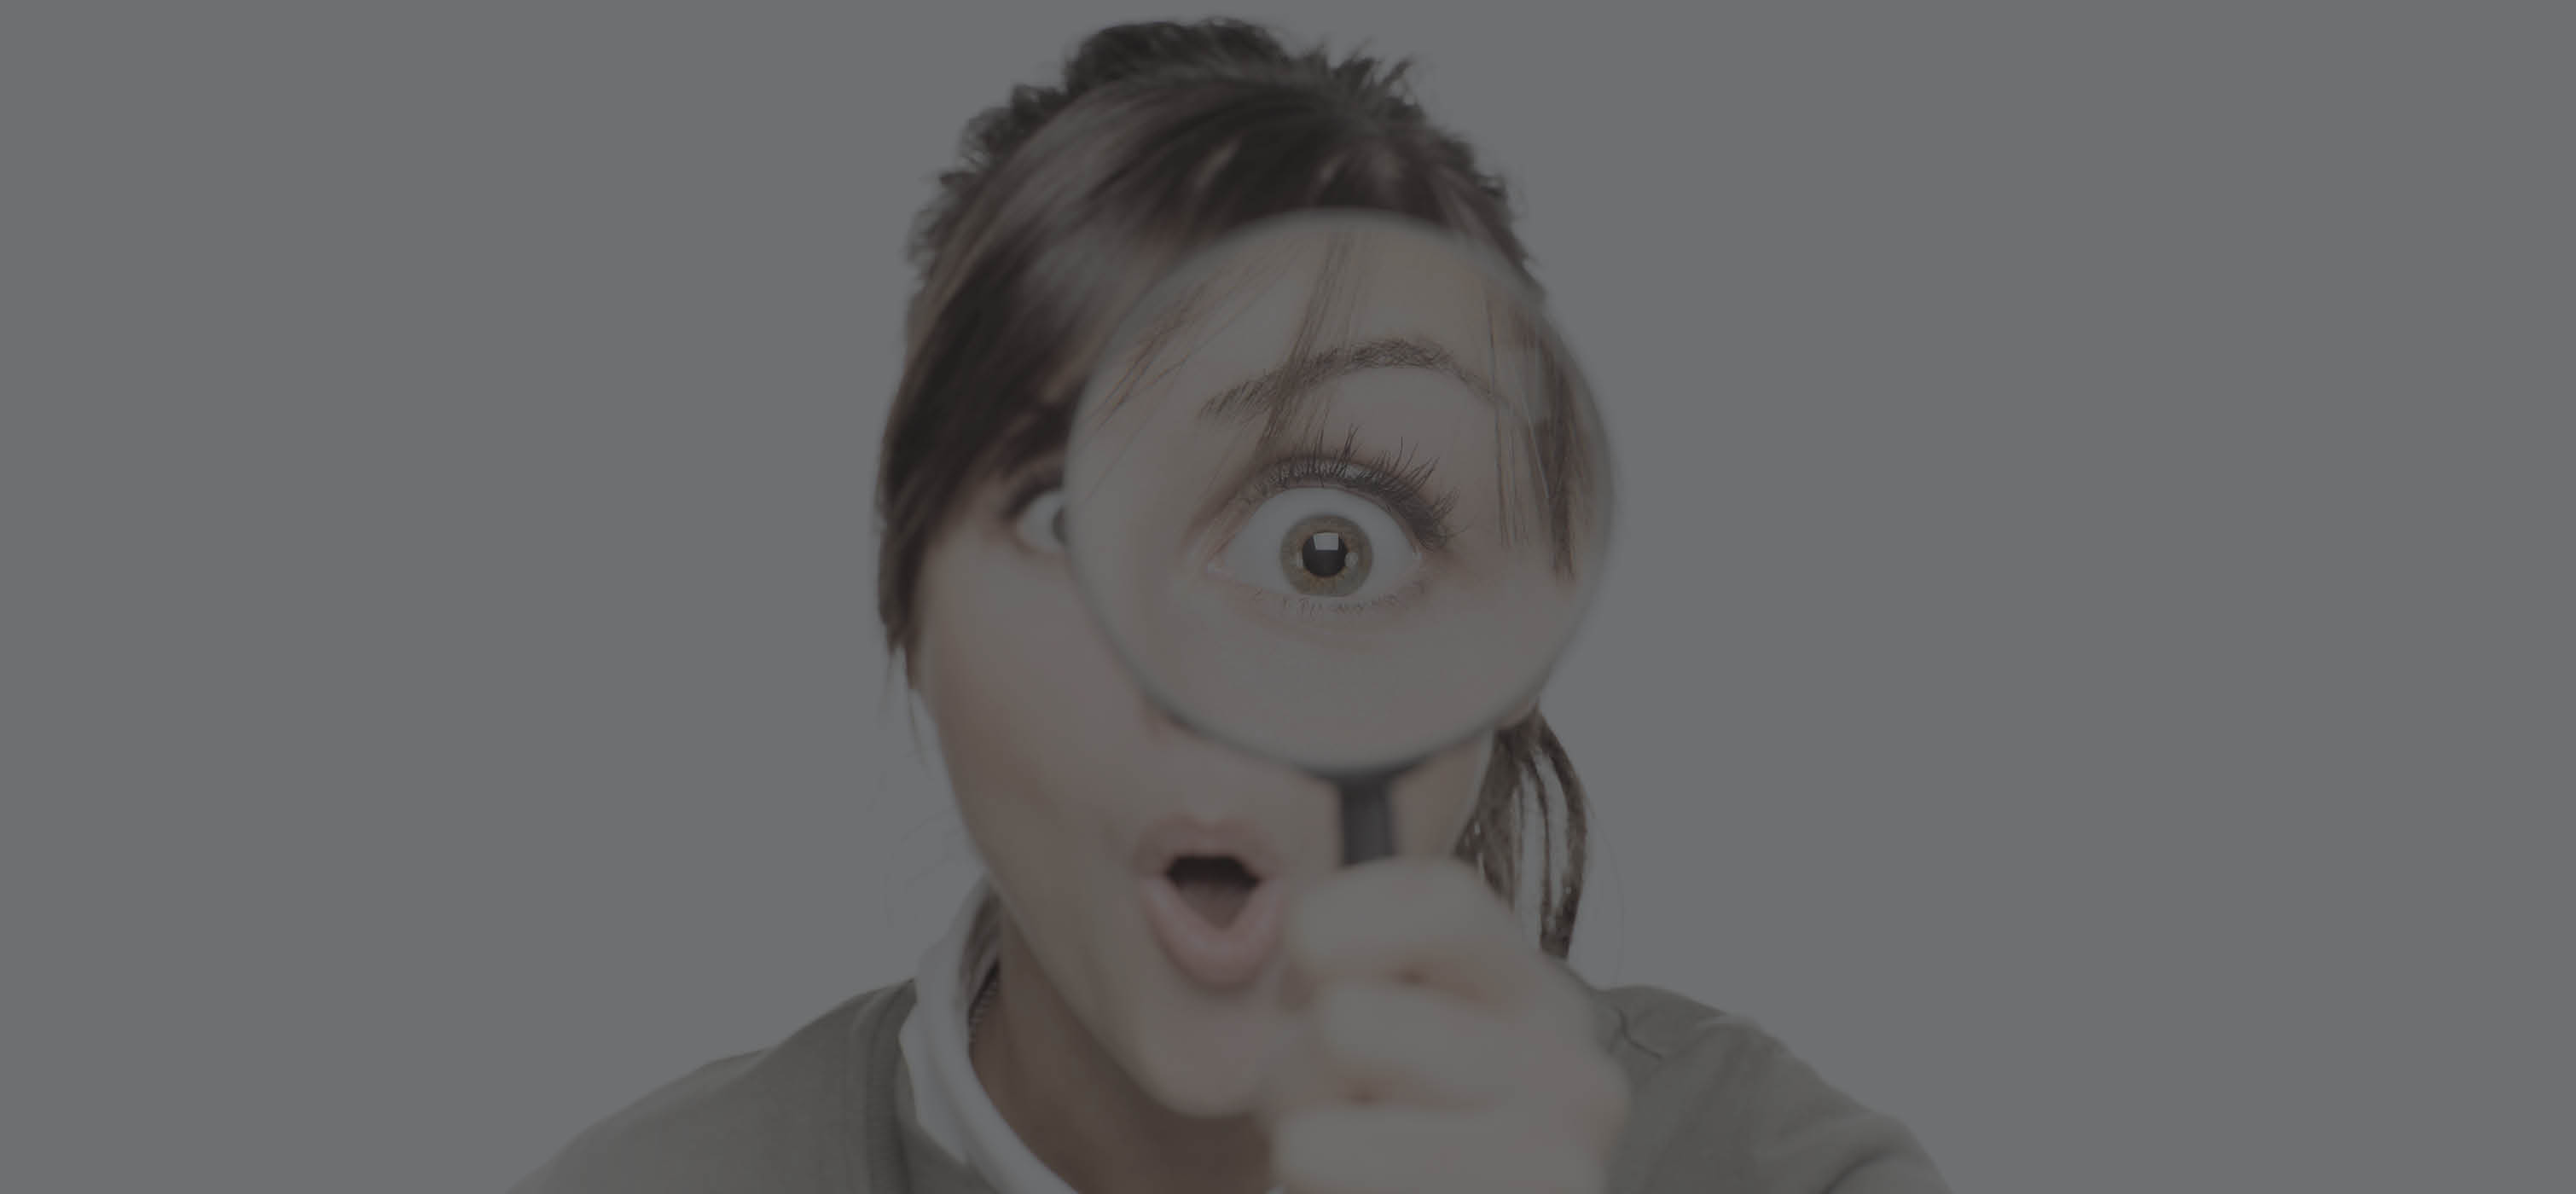 Person holding magnifying glass in front of them toward the camera making their left eye look large